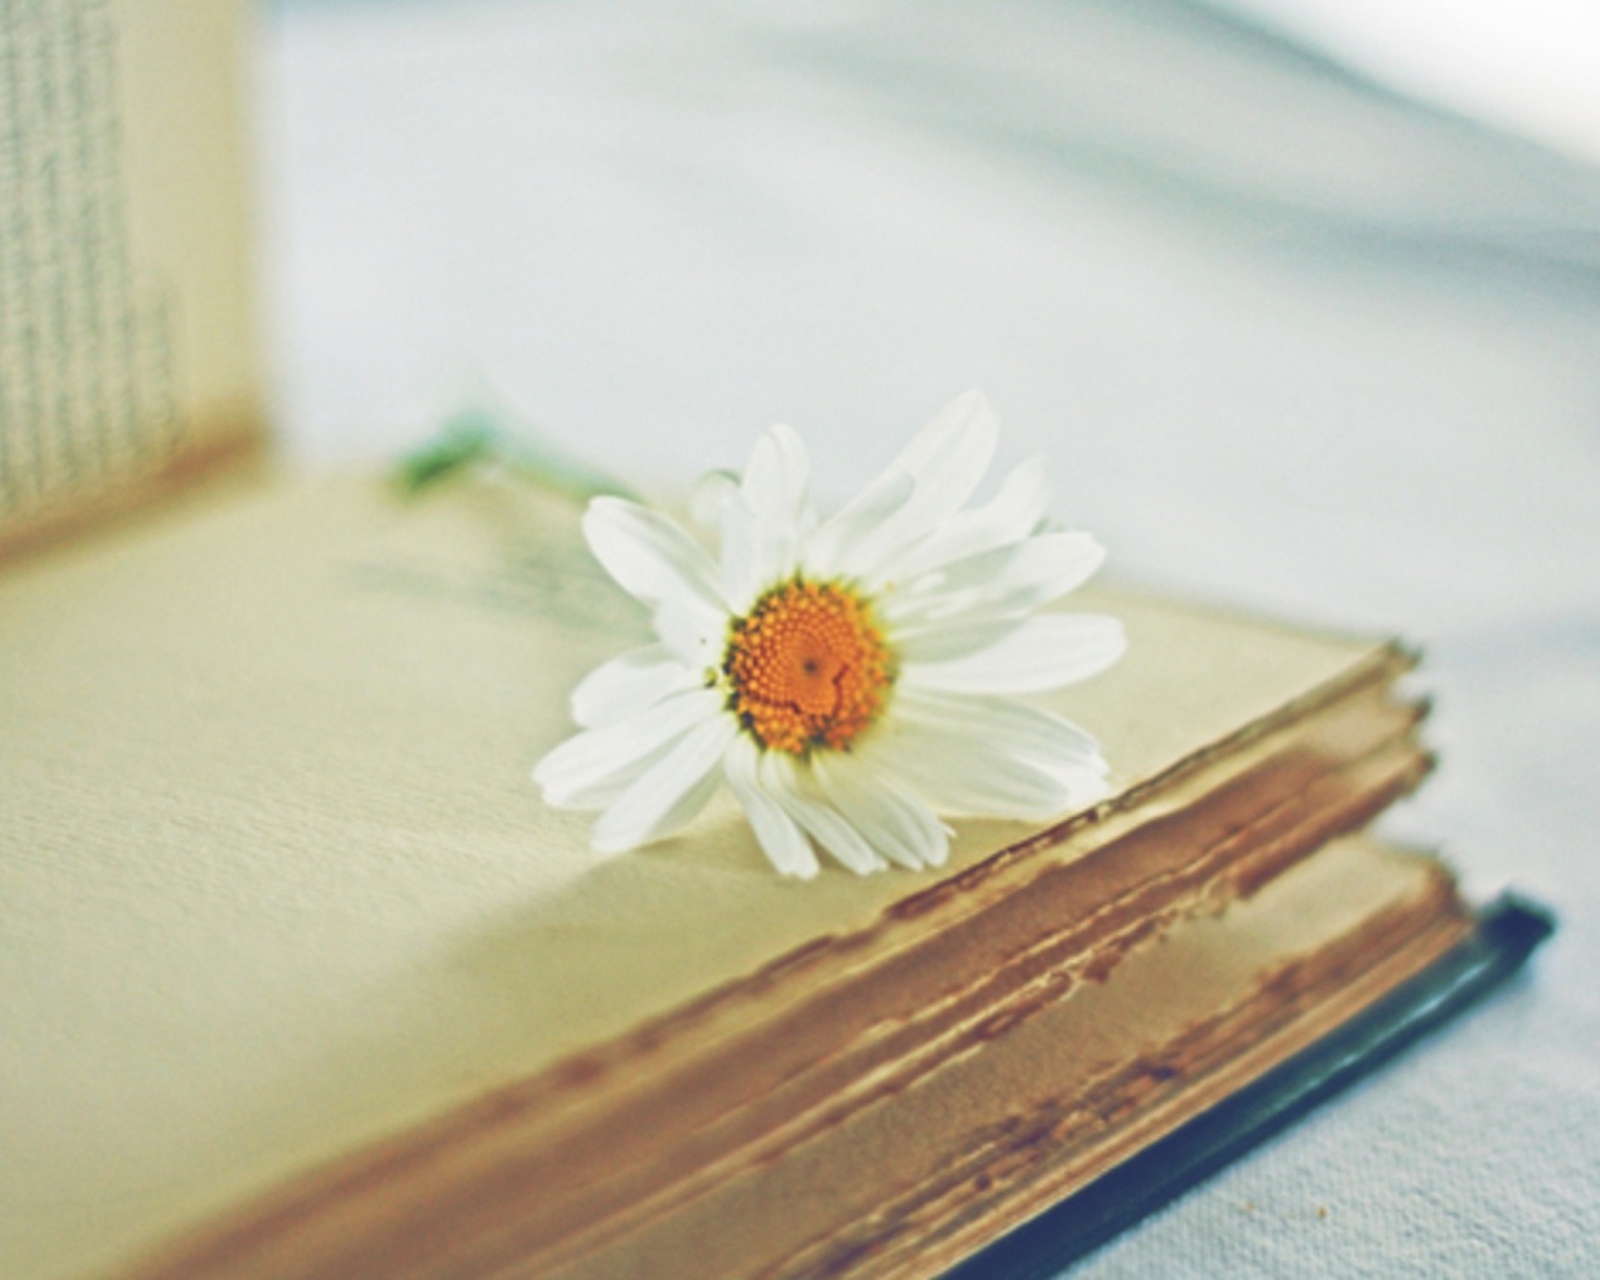 Book And Daisy wallpaper 1600x1280